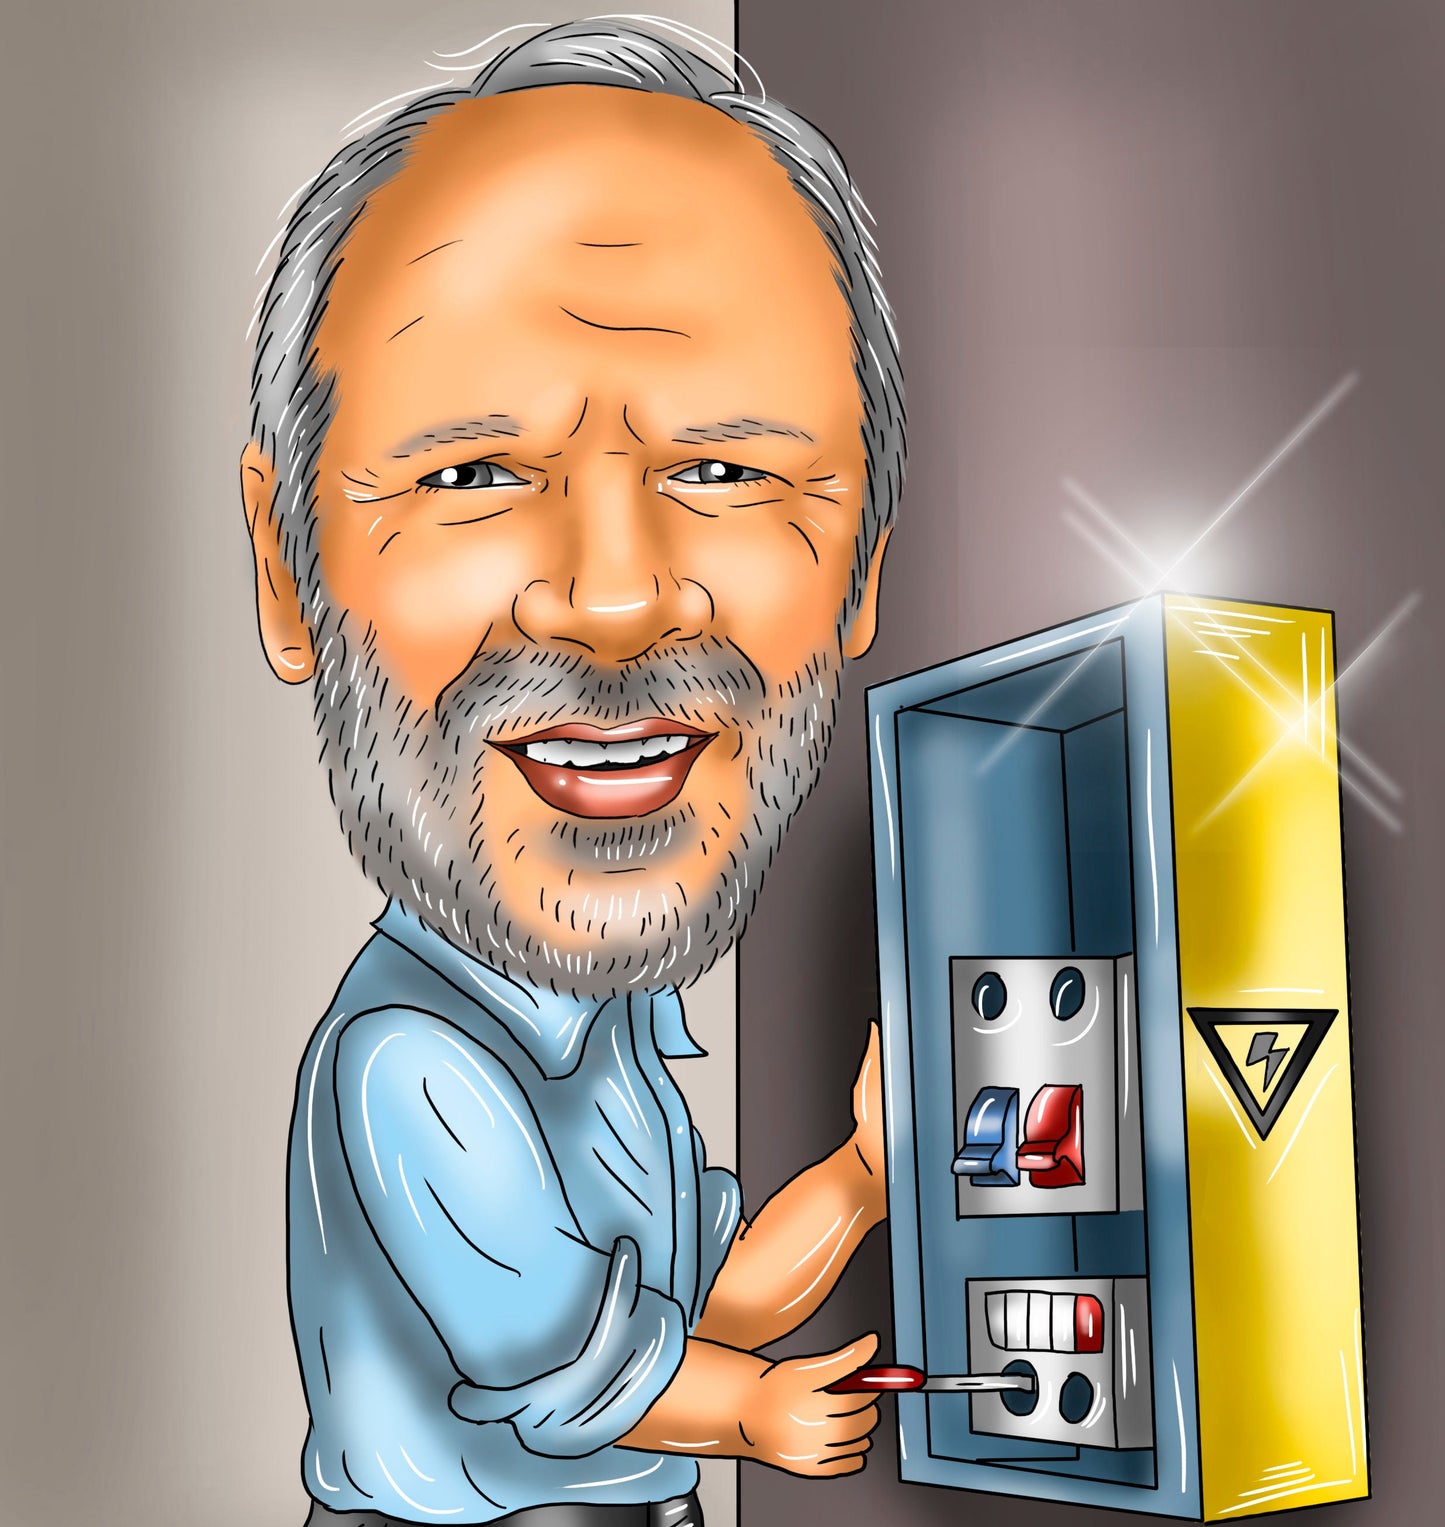 Electrician Gift - Caricature Portrait from Photo/Electrician Gifts/ Wireman Gift/Electrical Engineer Gift